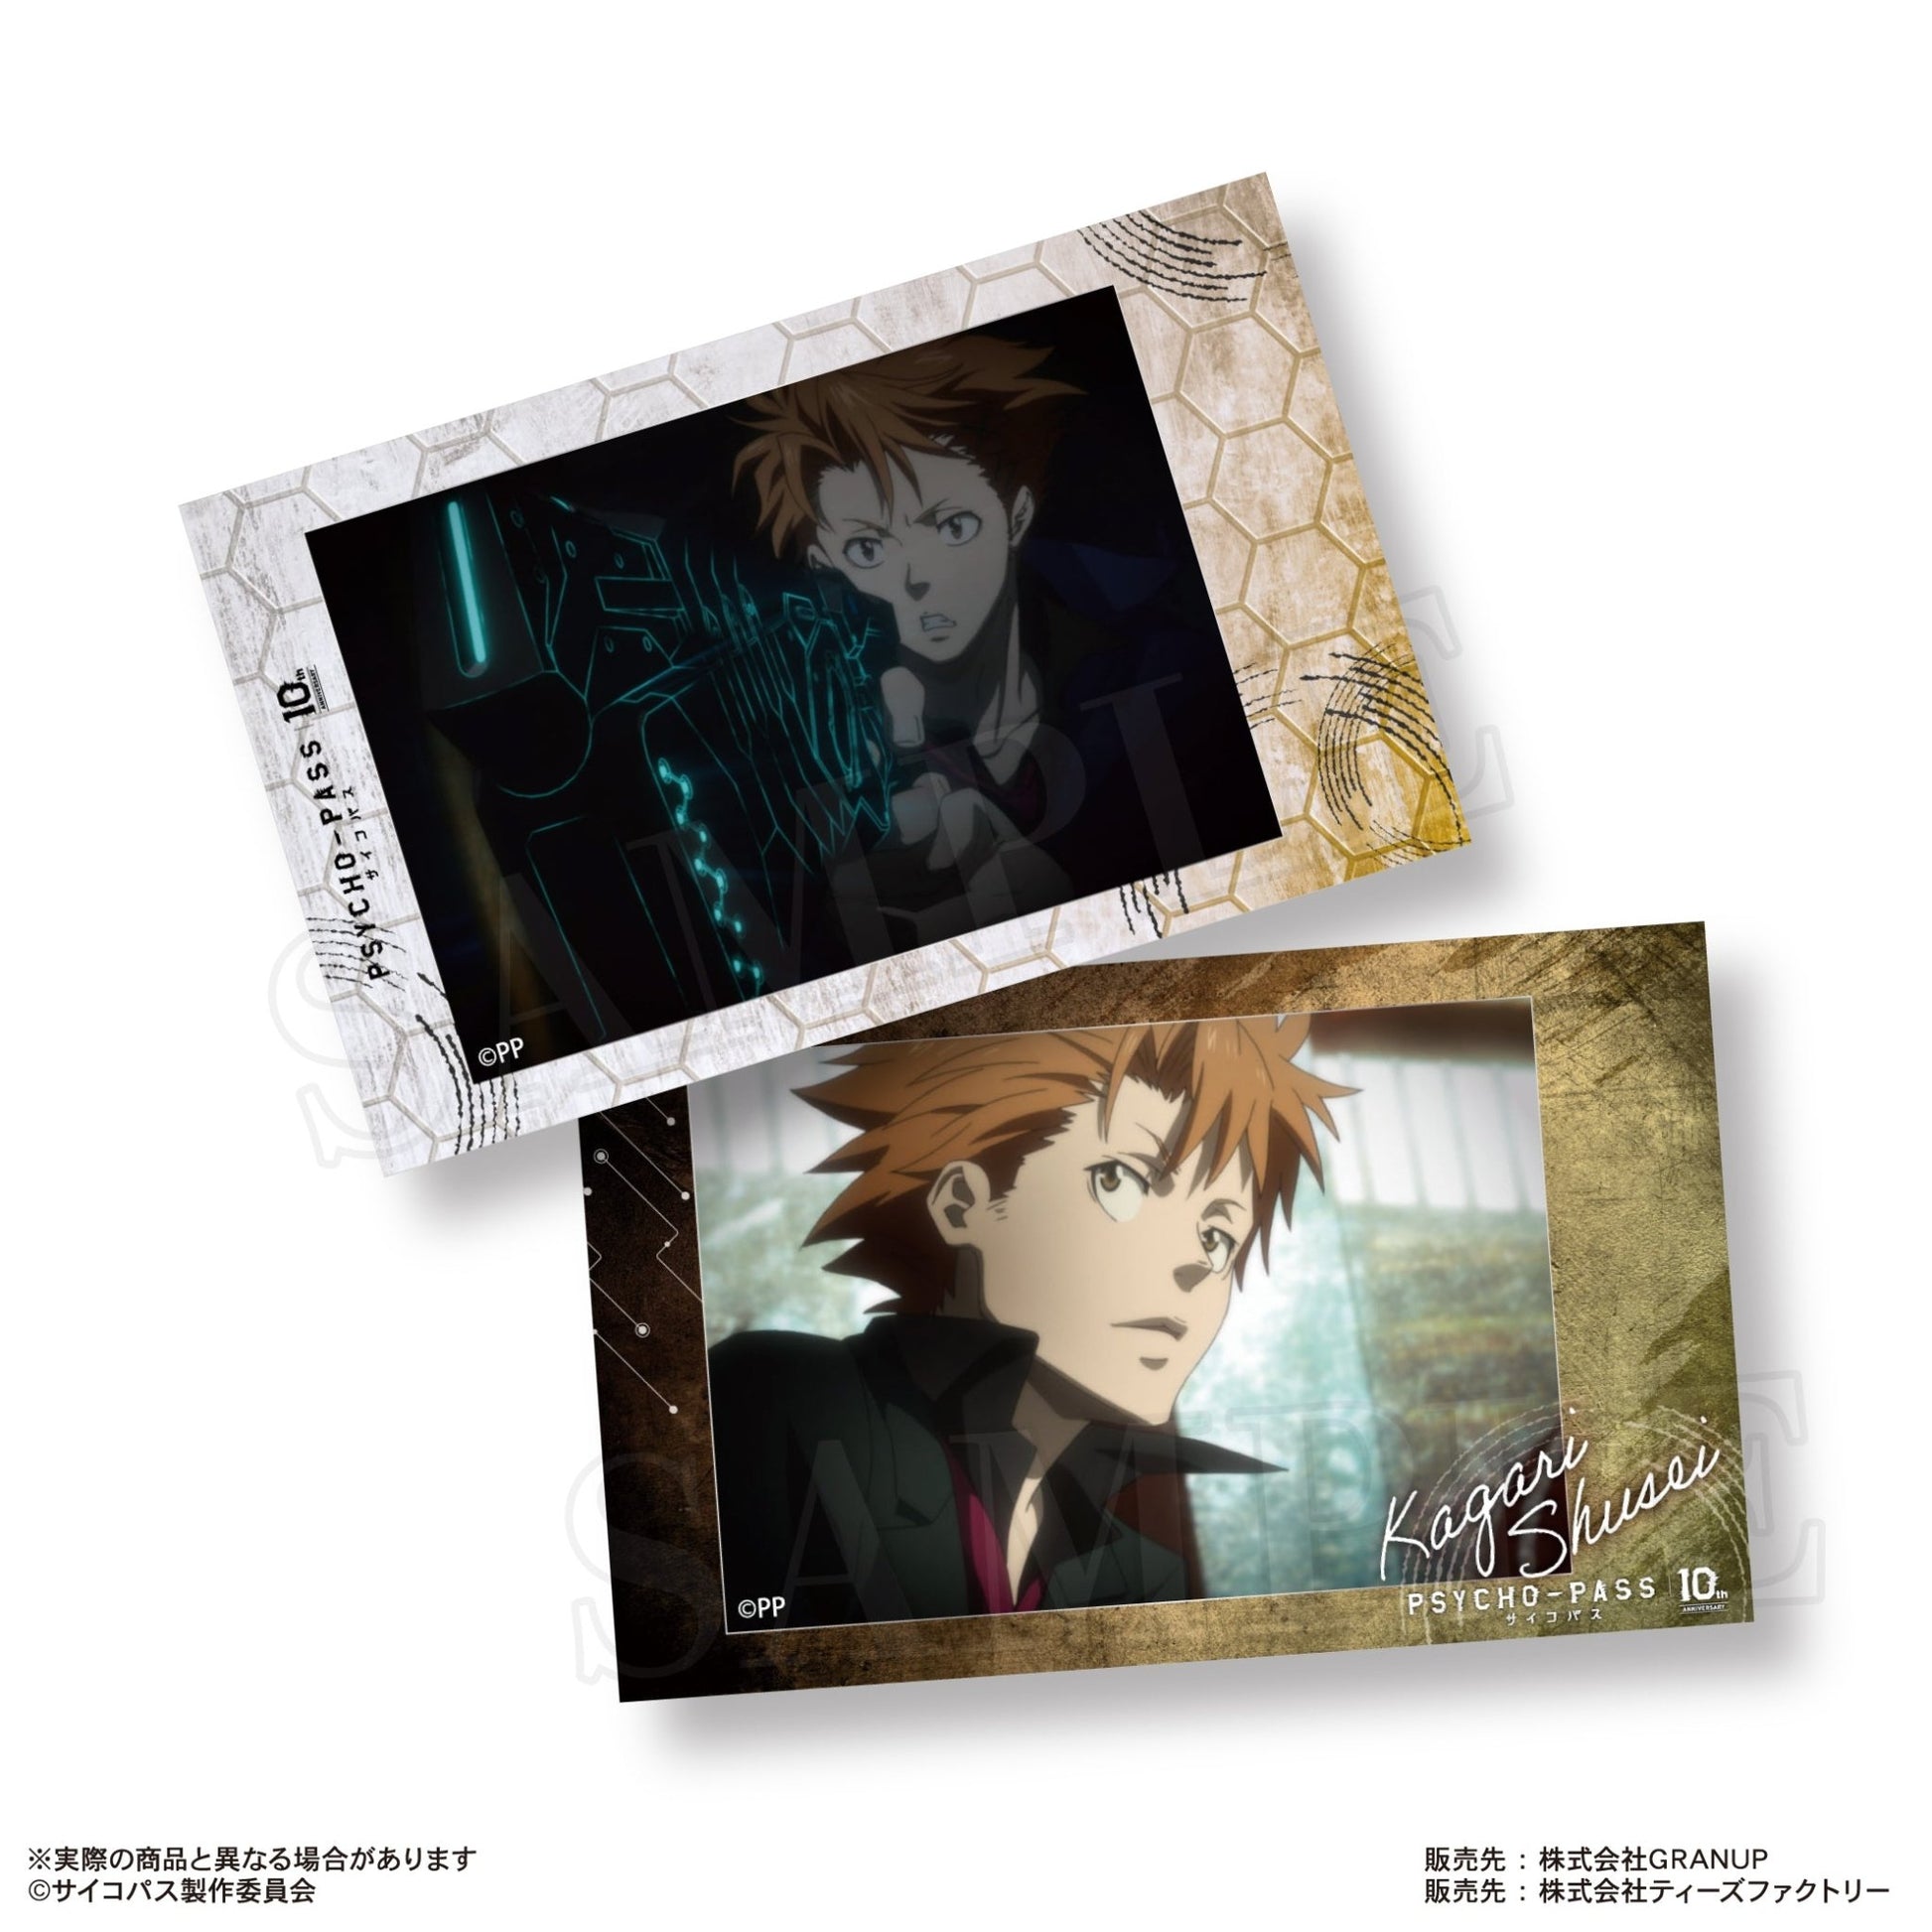 GRANUP - Psycho-Pass Trading Smaroid (Instax Style Bromide): 1 Random Pull - Good Game Anime